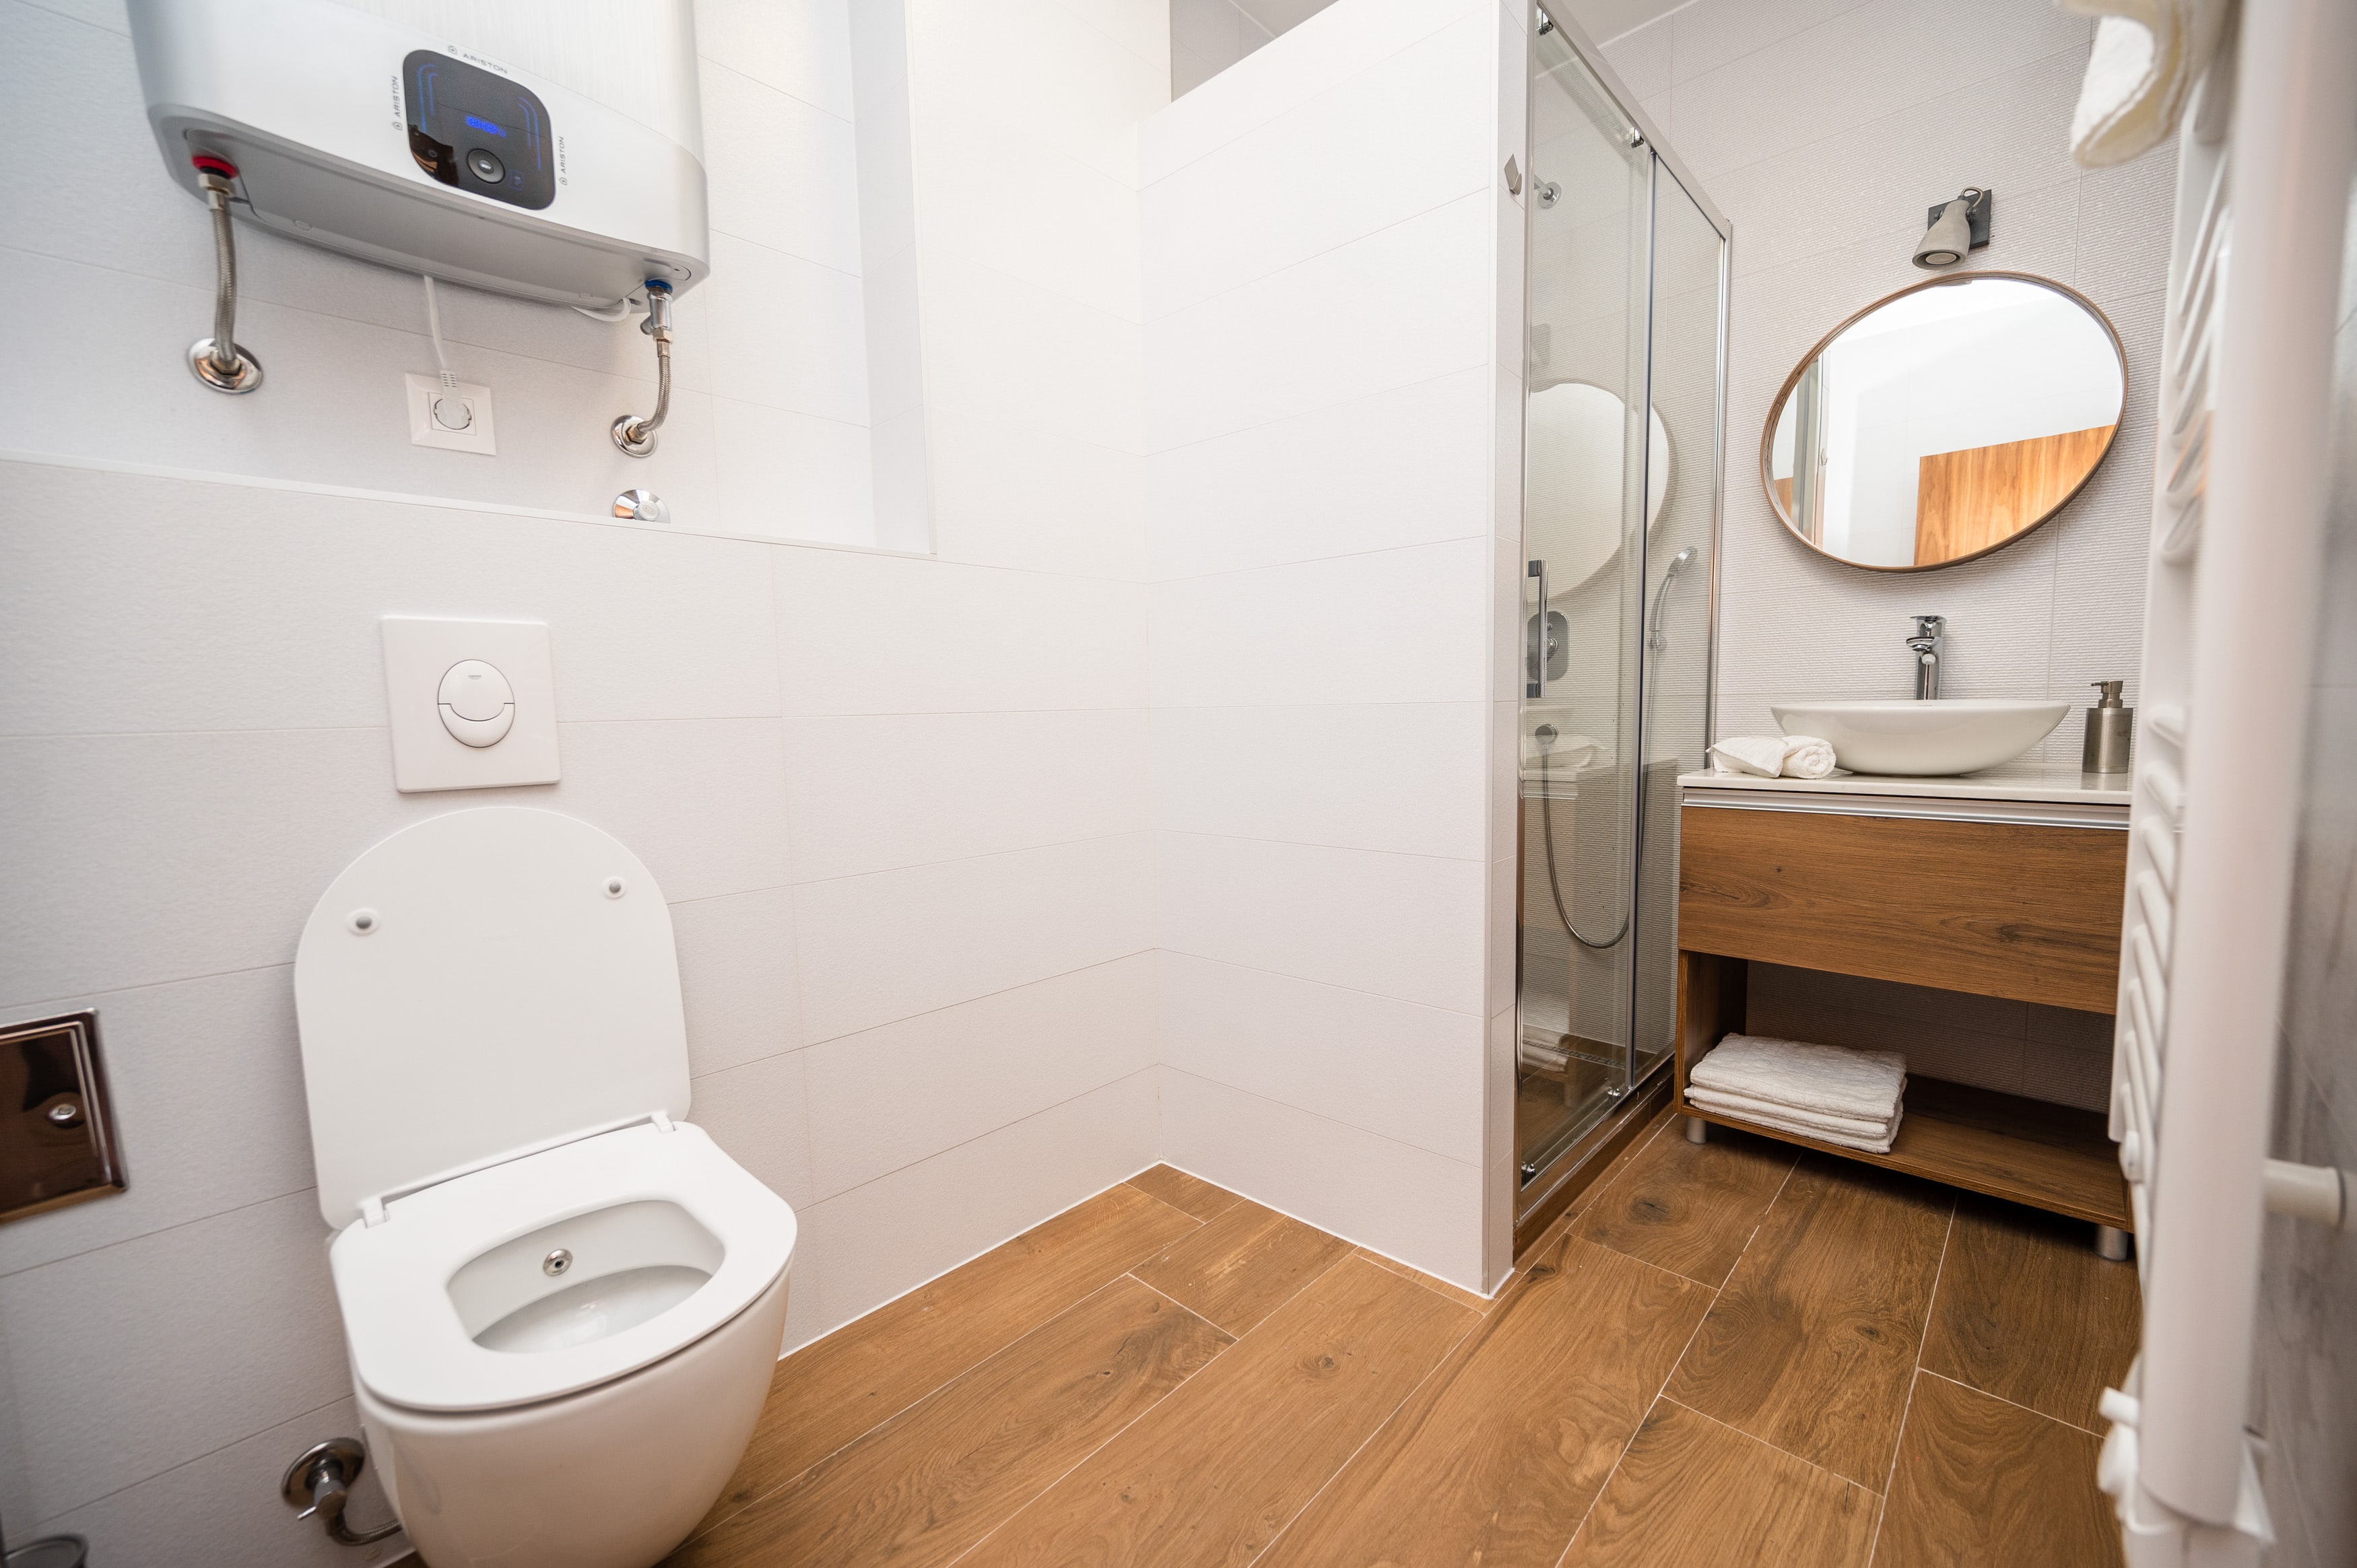 Our spacious bathroom comes with a walk-in shower, fresh towels and toiletries for you!